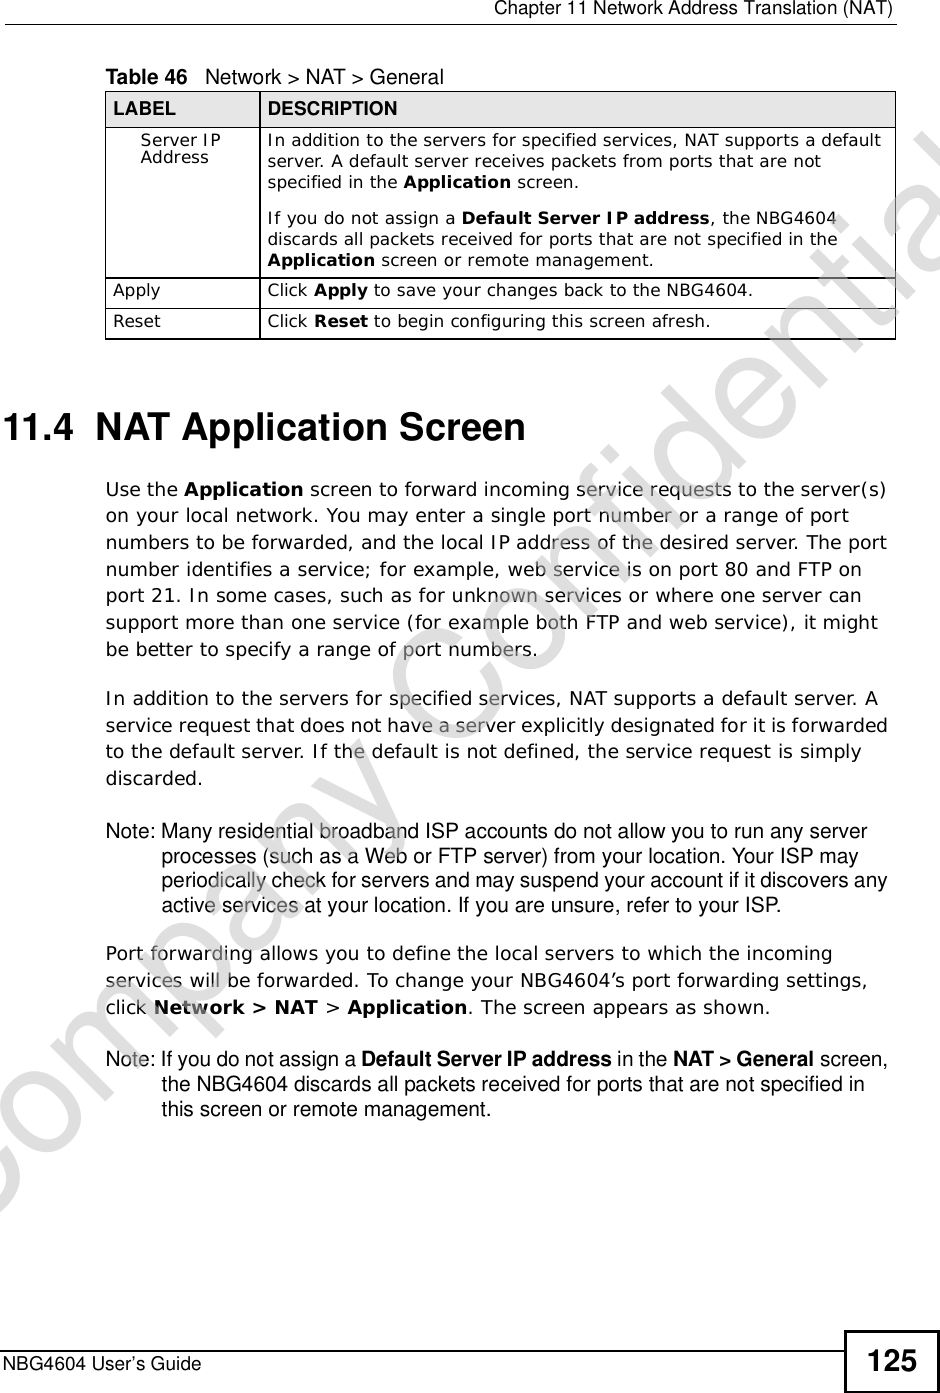  Chapter 11Network Address Translation (NAT)NBG4604 User’s Guide 12511.4  NAT Application Screen   Use the Application screen to forward incoming service requests to the server(s) on your local network. You may enter a single port number or a range of port numbers to be forwarded, and the local IP address of the desired server. The port number identifies a service; for example, web service is on port 80 and FTP on port 21. In some cases, such as for unknown services or where one server can support more than one service (for example both FTP and web service), it might be better to specify a range of port numbers.In addition to the servers for specified services, NAT supports a default server. A service request that does not have a server explicitly designated for it is forwarded to the default server. If the default is not defined, the service request is simply discarded.Note: Many residential broadband ISP accounts do not allow you to run any server processes (such as a Web or FTP server) from your location. Your ISP may periodically check for servers and may suspend your account if it discovers any active services at your location. If you are unsure, refer to your ISP.Port forwarding allows you to define the local servers to which the incoming services will be forwarded. To change your NBG4604’s port forwarding settings, click Network &gt; NAT &gt; Application. The screen appears as shown.Note: If you do not assign a Default ServerIP address in the NAT &gt;General screen, the NBG4604 discards all packets received for ports that are not specified in this screen or remote management.Server IP Address In addition to the servers for specified services, NAT supports a default server. A default server receives packets from ports that are not specified in the Application screen. If you do not assign a DefaultServerIP address, the NBG4604 discards all packets received for ports that are not specified in the Application screen or remote management.Apply Click Apply to save your changes back to the NBG4604.Reset Click Reset to begin configuring this screen afresh.Table 46   Network &gt; NAT &gt; GeneralLABEL DESCRIPTIONCompany Confidential